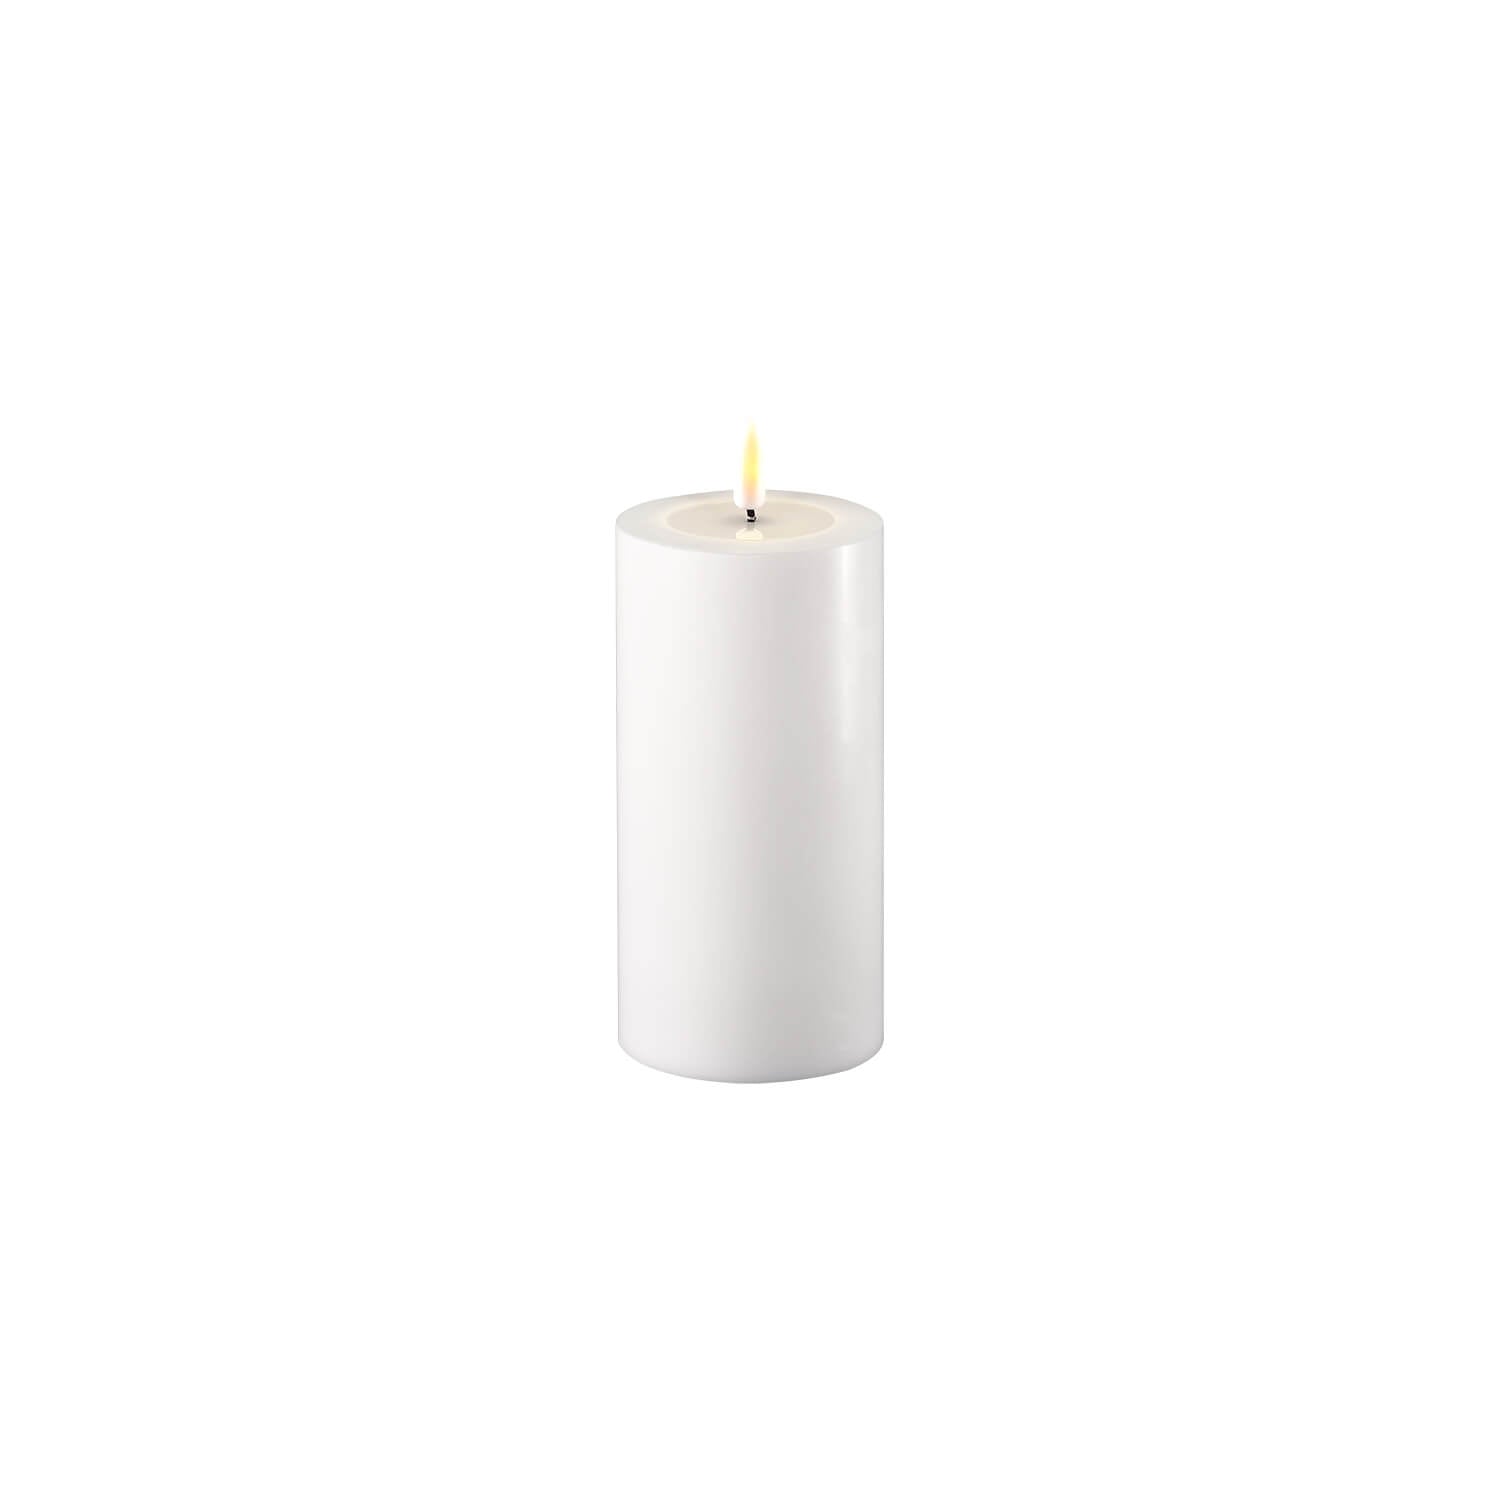 The Home Deluxe LED Candle 7.5cm x 15cm - White 1 Shaws Department Stores